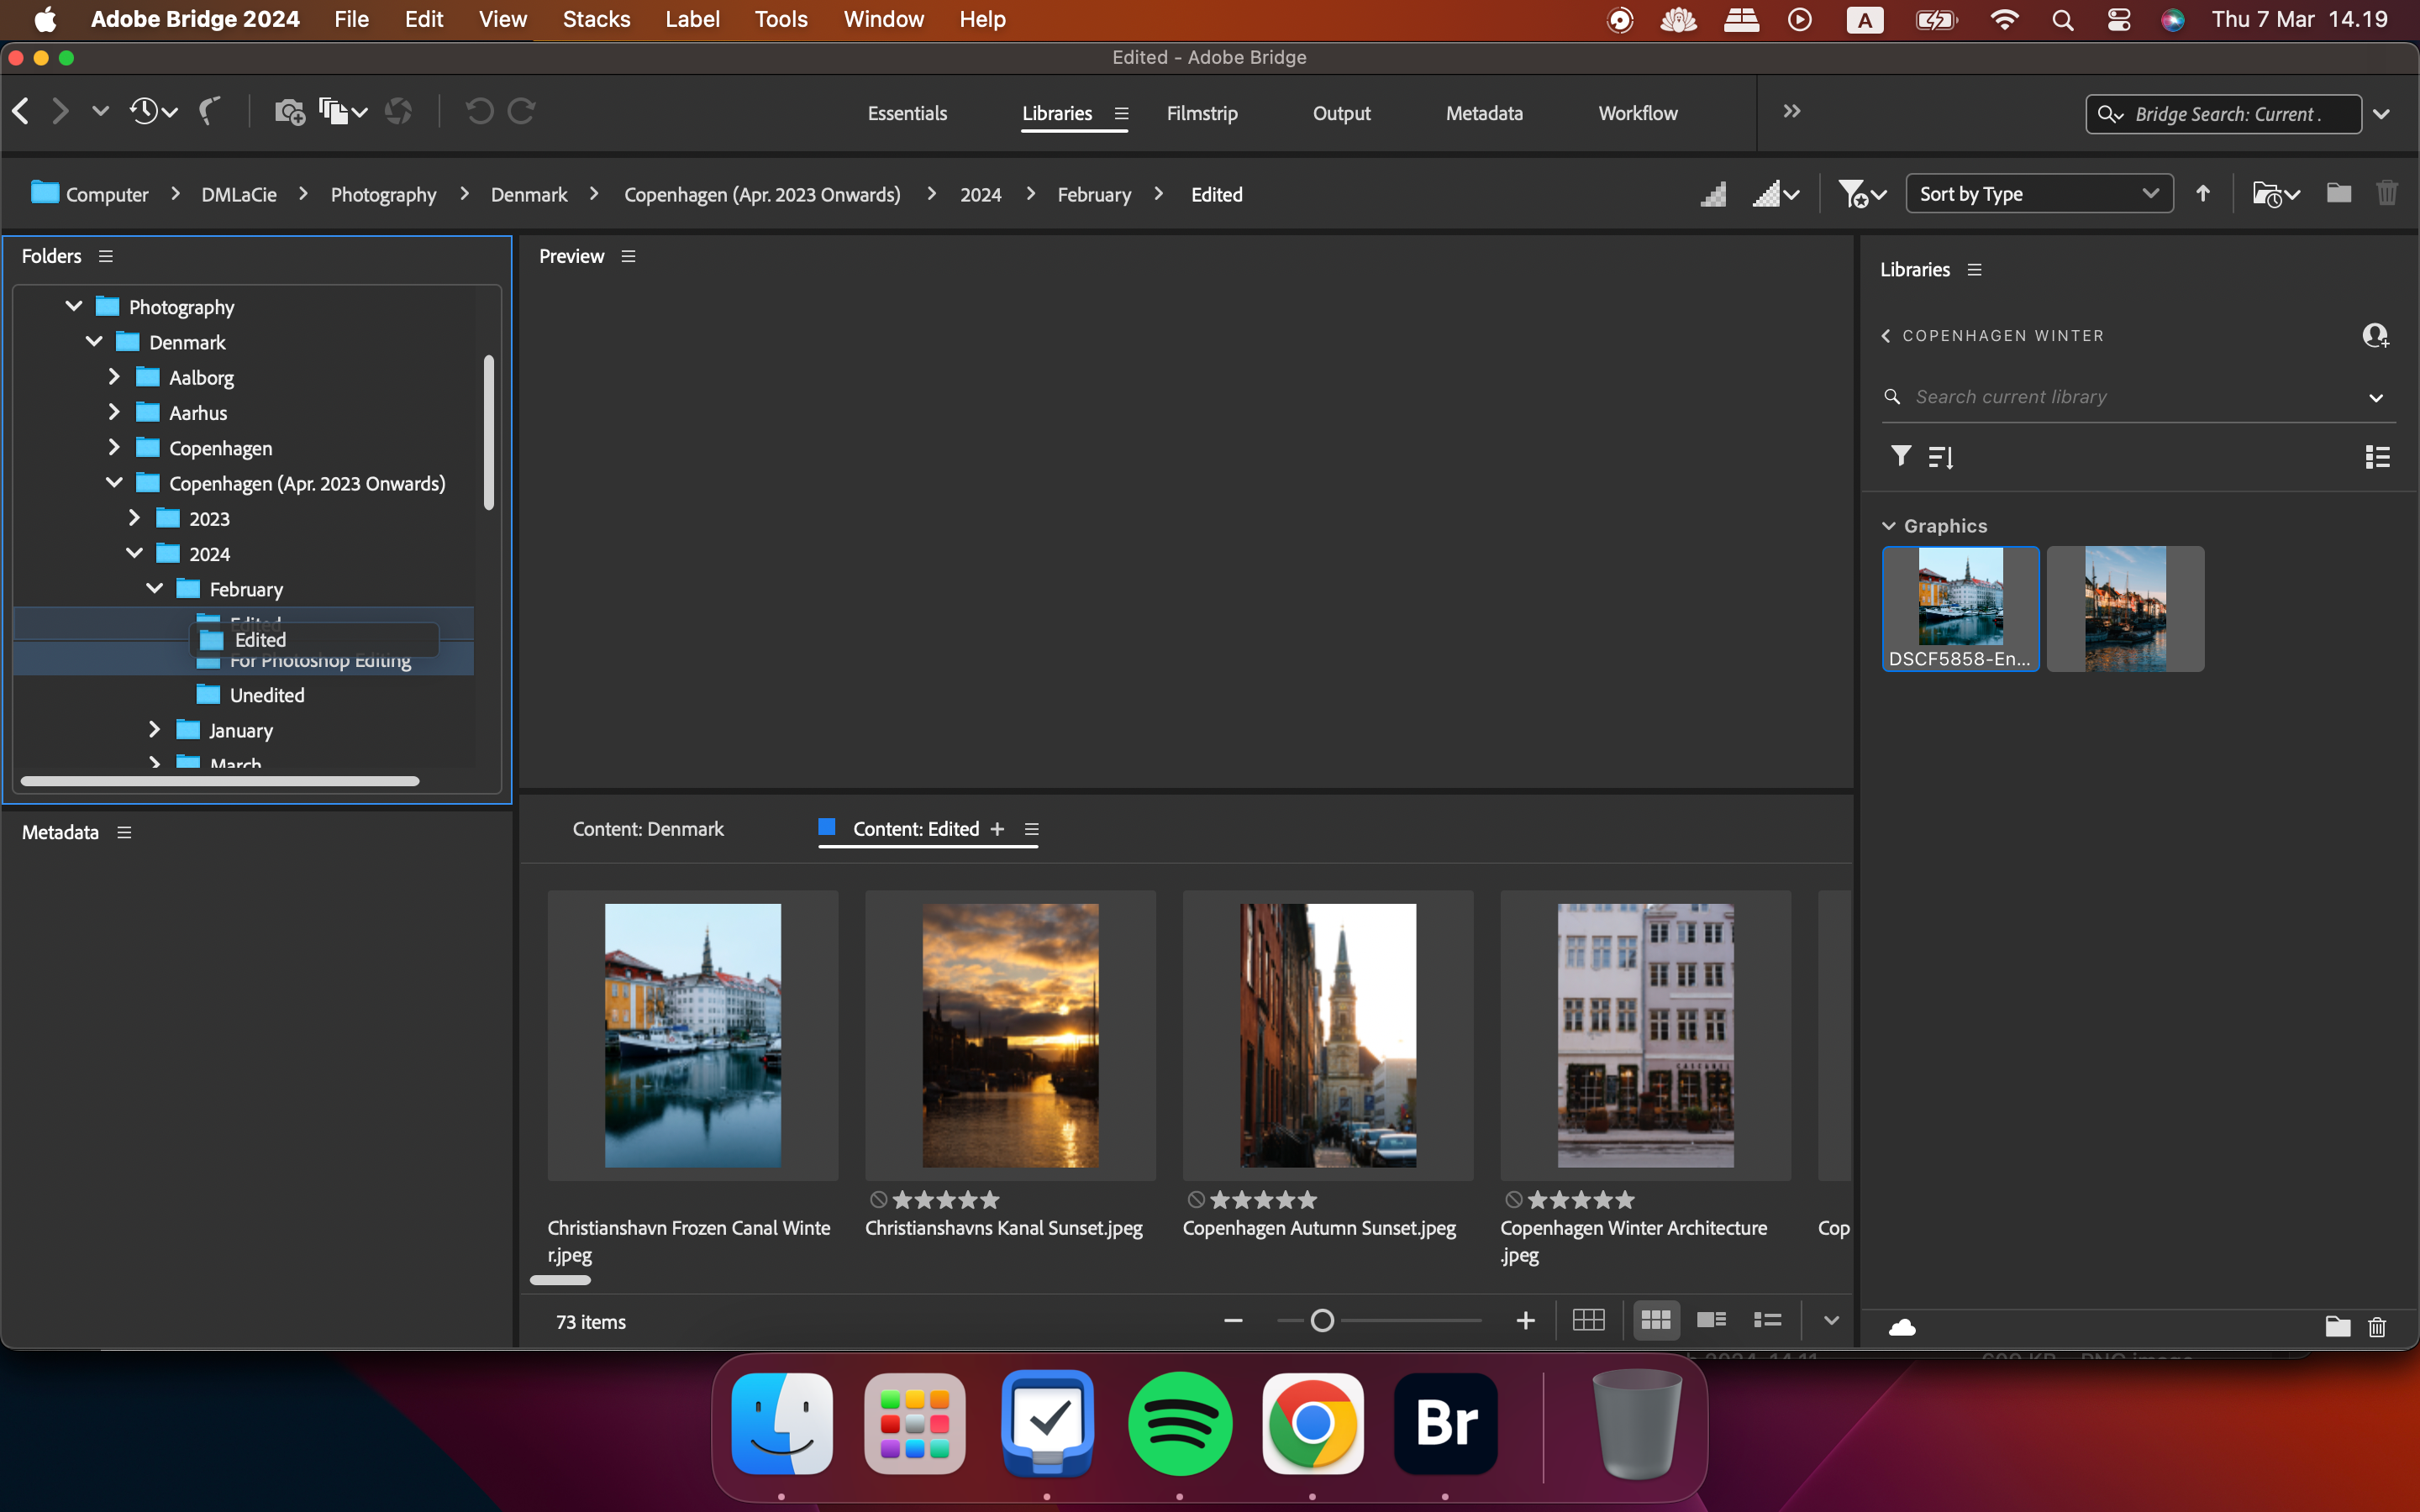 Drag and Drop Different Files in the Adobe Bridge App